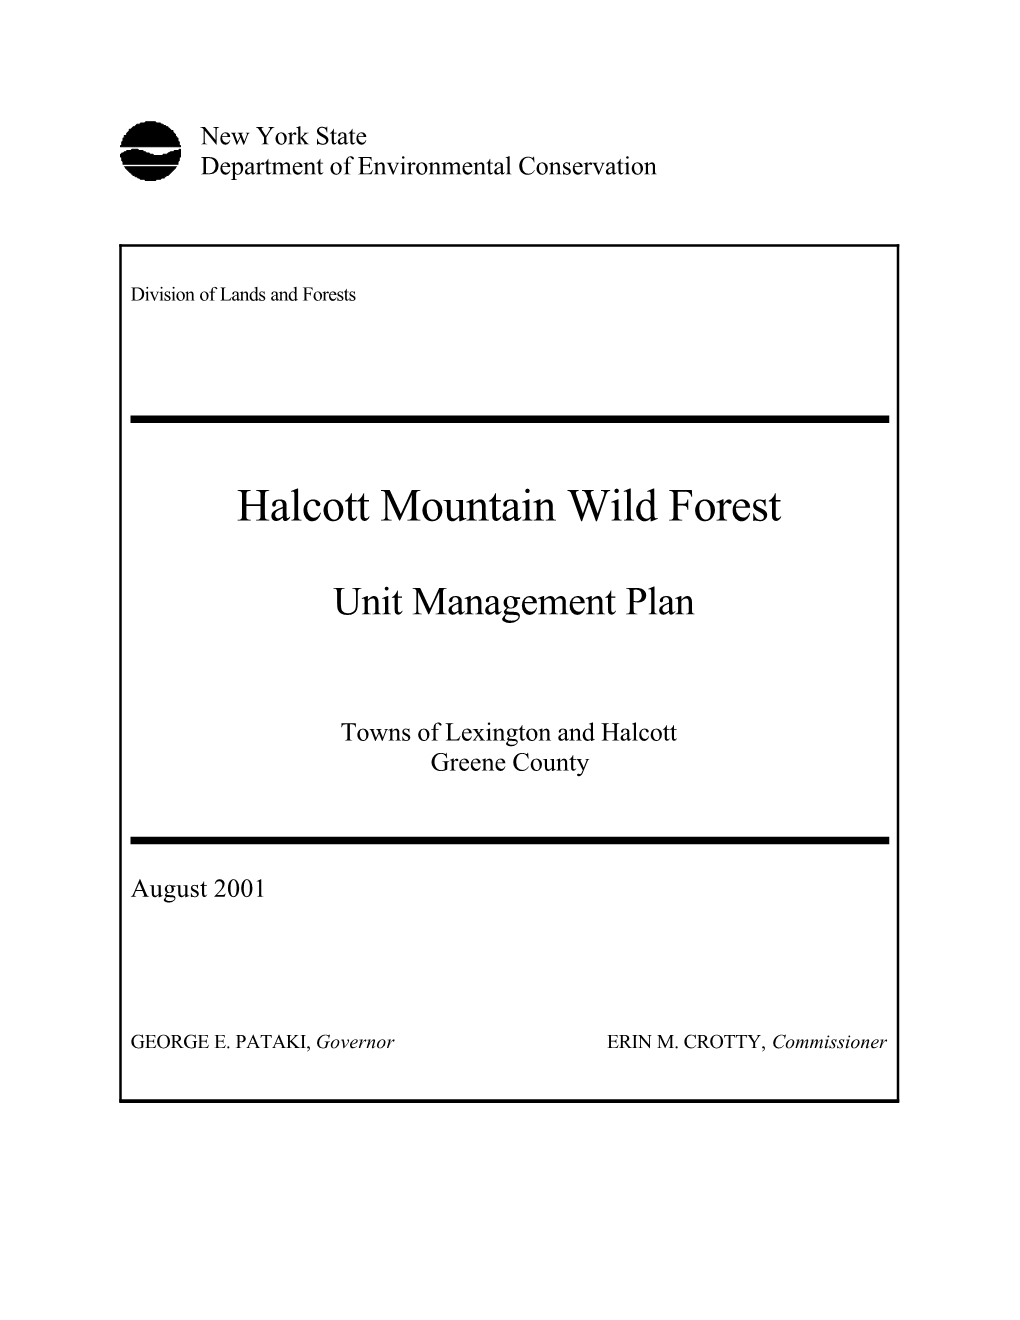 Halcott Mountain Wild Forest Unit Management Plan Is a Combined Effort of the Unit Management Planning Team and the Public